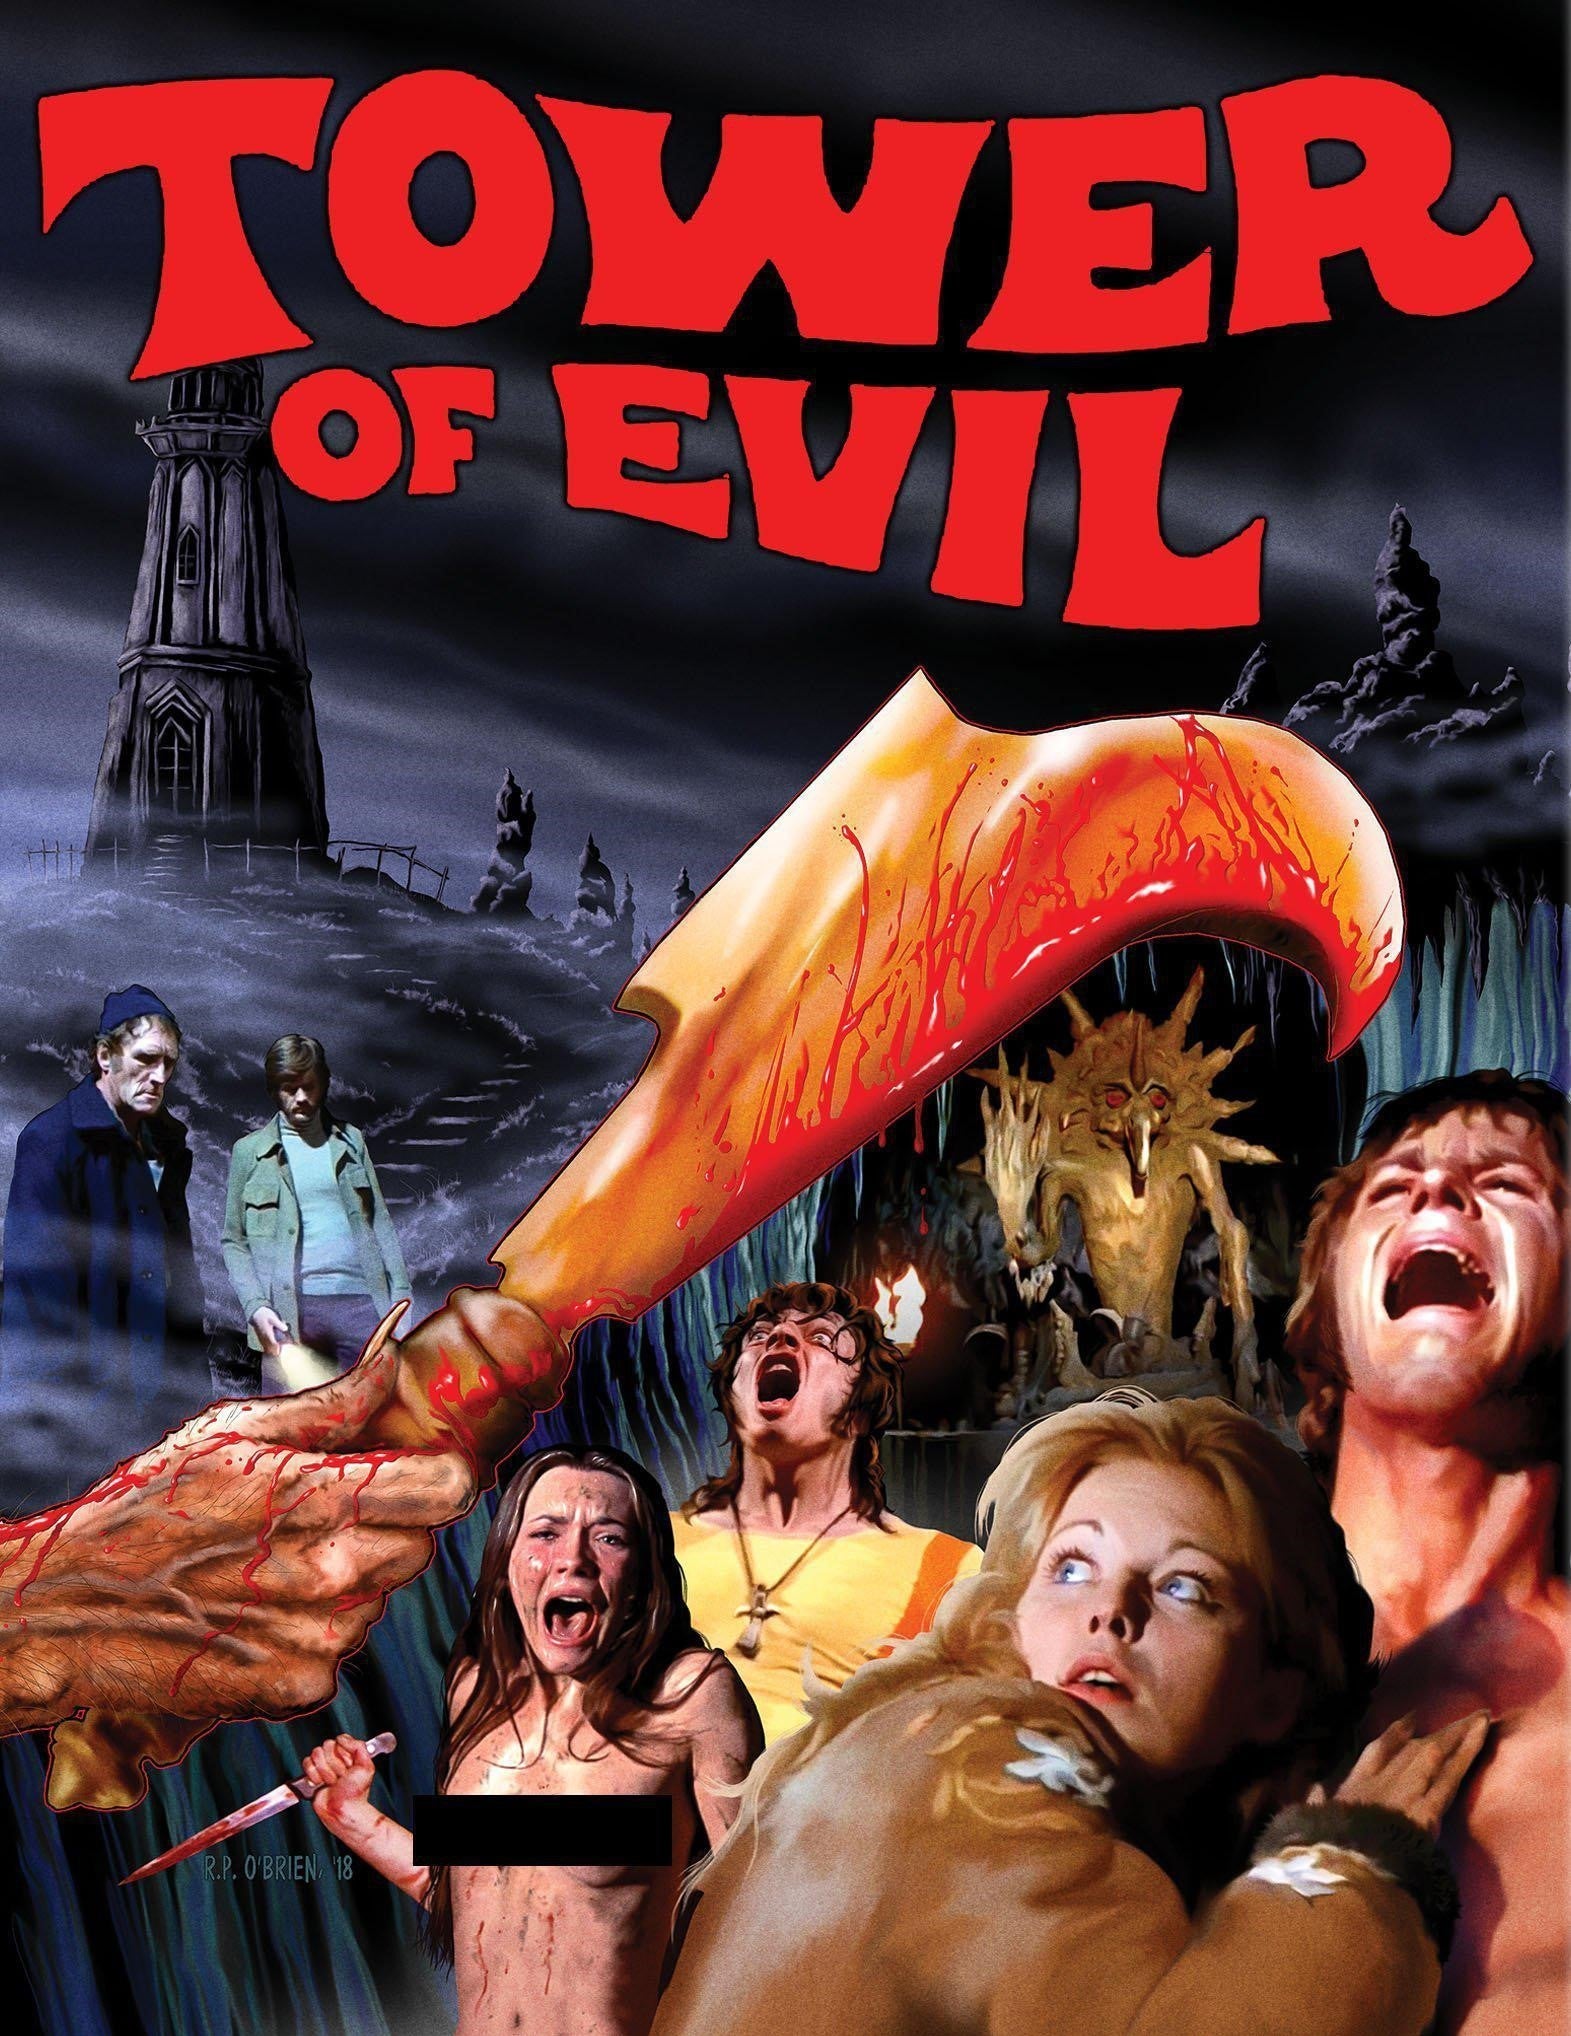 Tower Of Evil (Limited Edition) Blu-Ray Blu-Ray